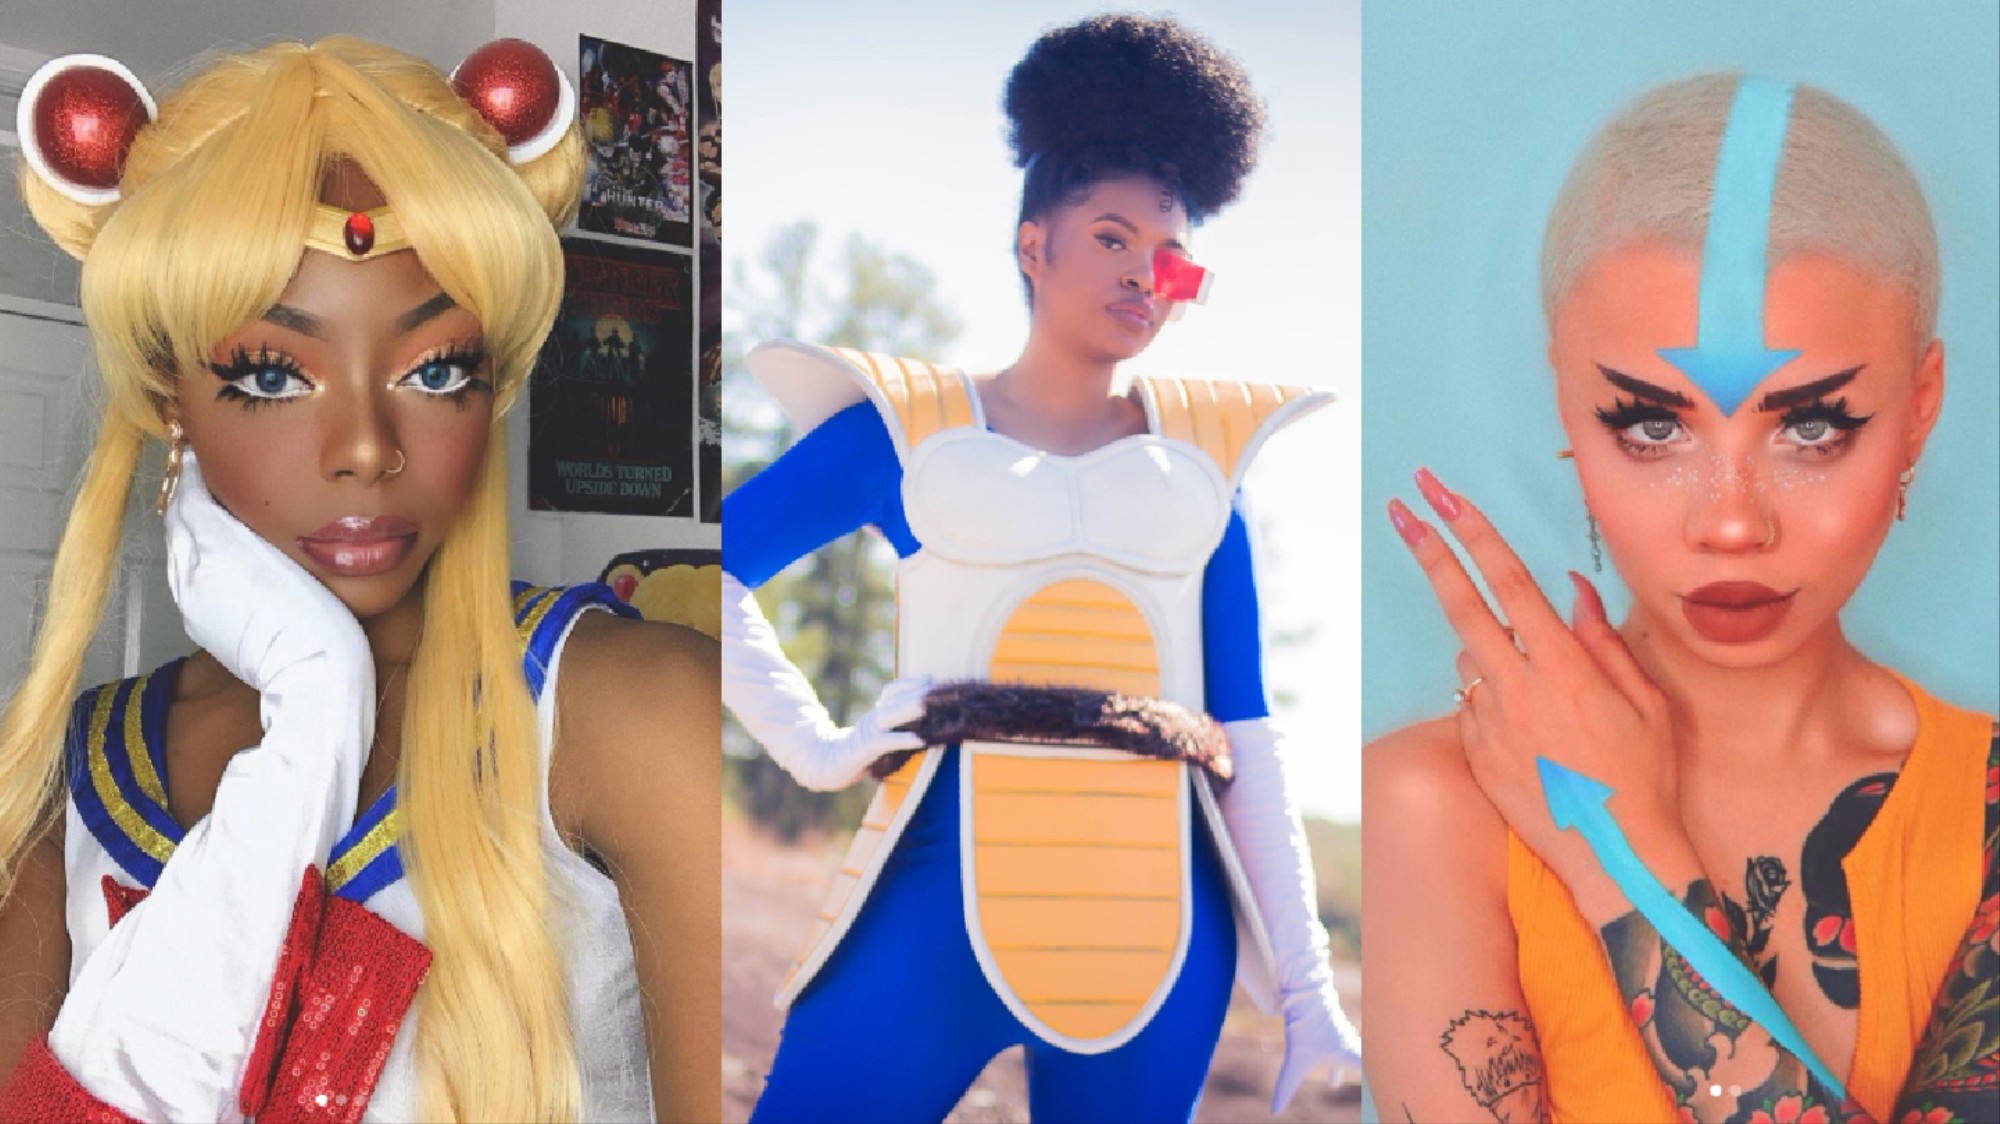 Blue Hair Ebony Xxx - Meet the Black Anime Cosplayers Blowing Up on Instagram - VICE